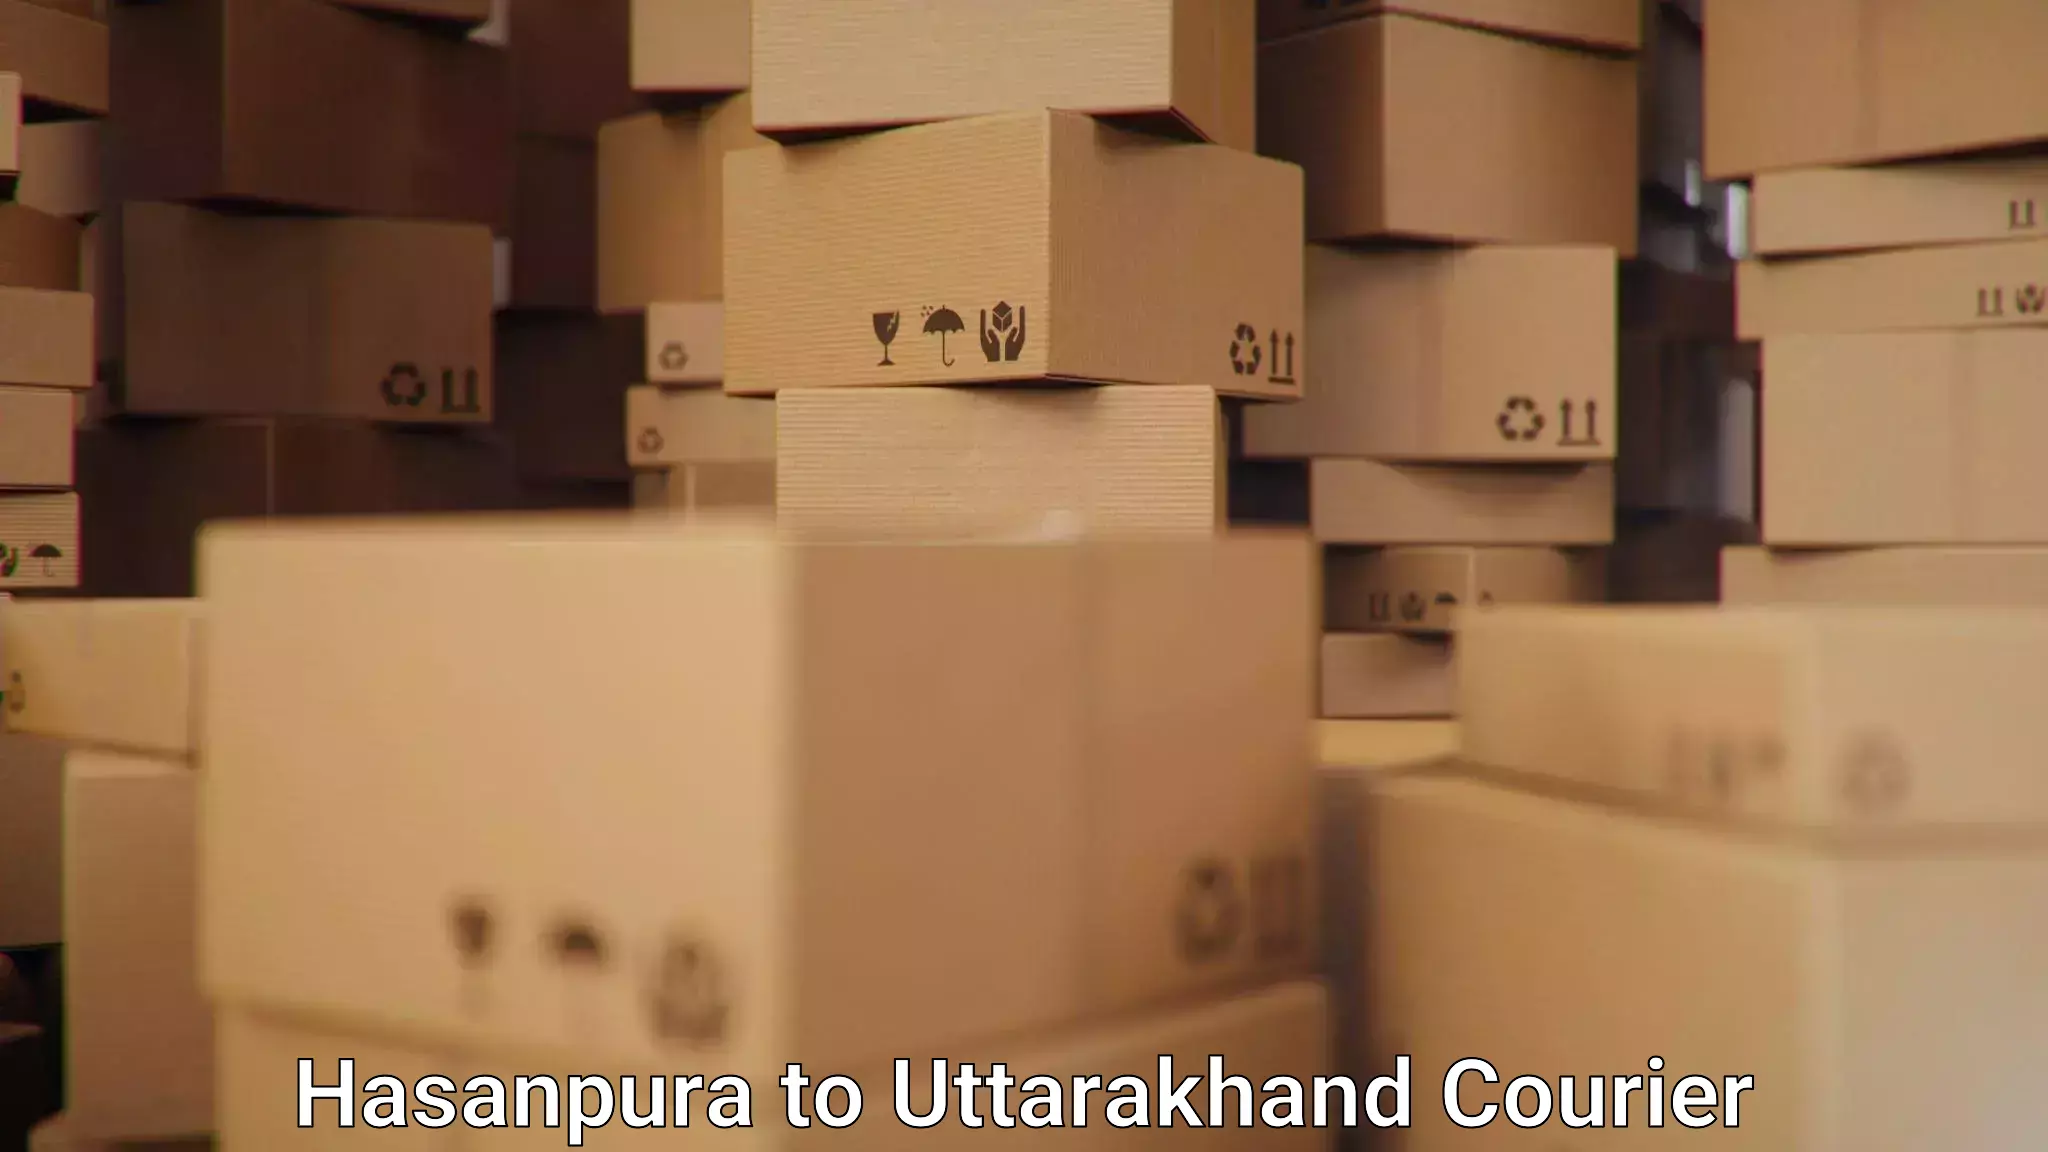 Automated parcel services Hasanpura to Uttarakhand